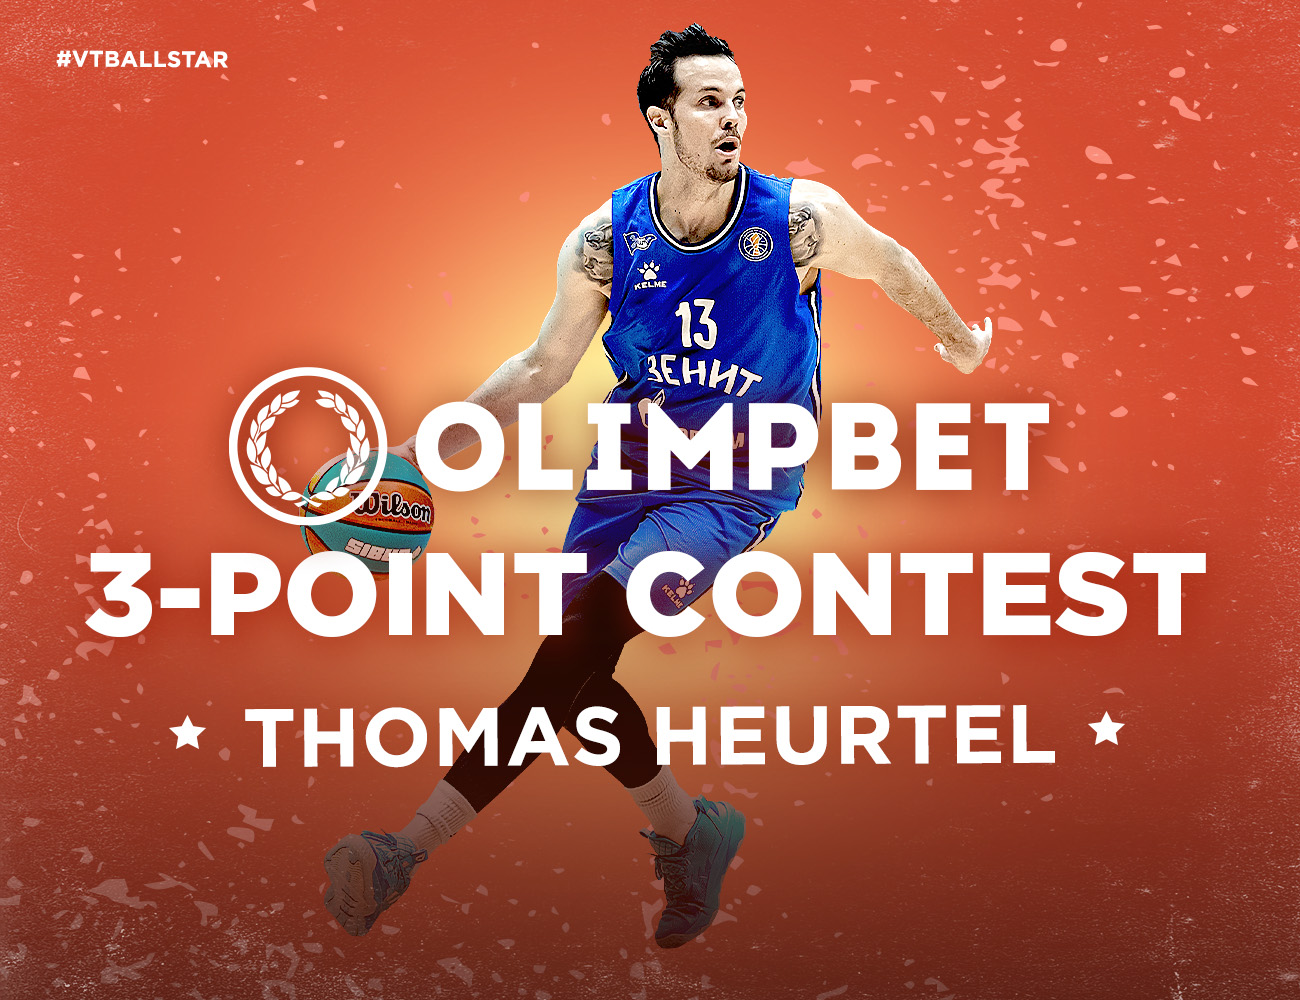 Thomas Heurtel will participate in Olimpbet Three-Point Contest!